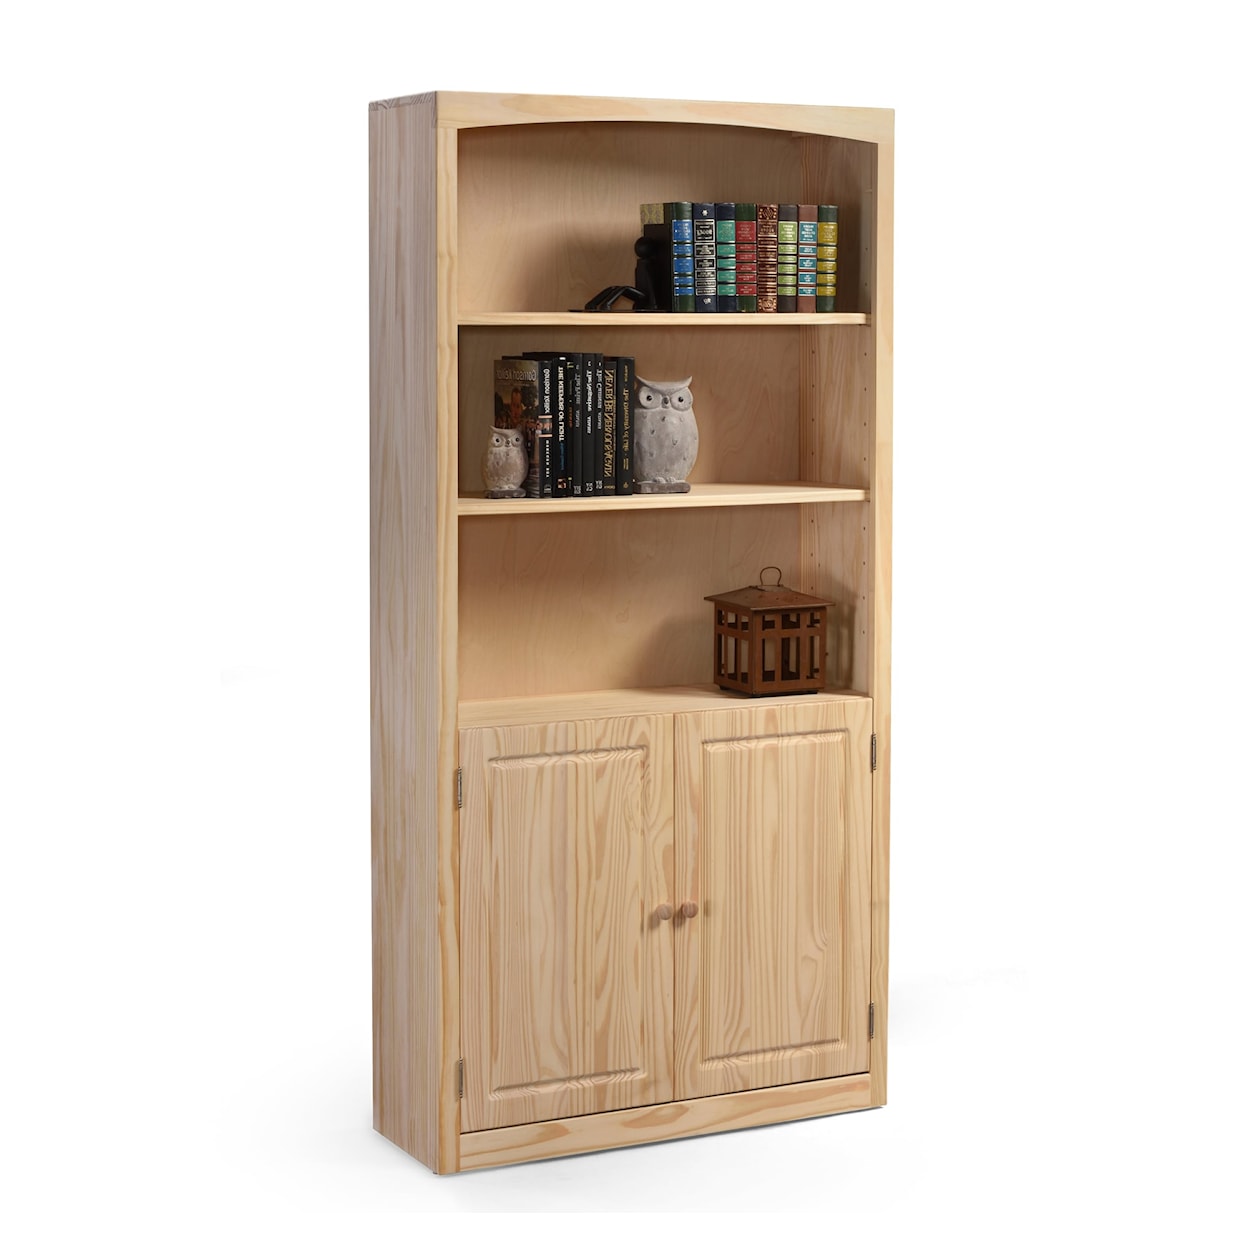 Archbold Furniture Pine Bookcases Customizable 36 X 72 Bookcase with Door Kit